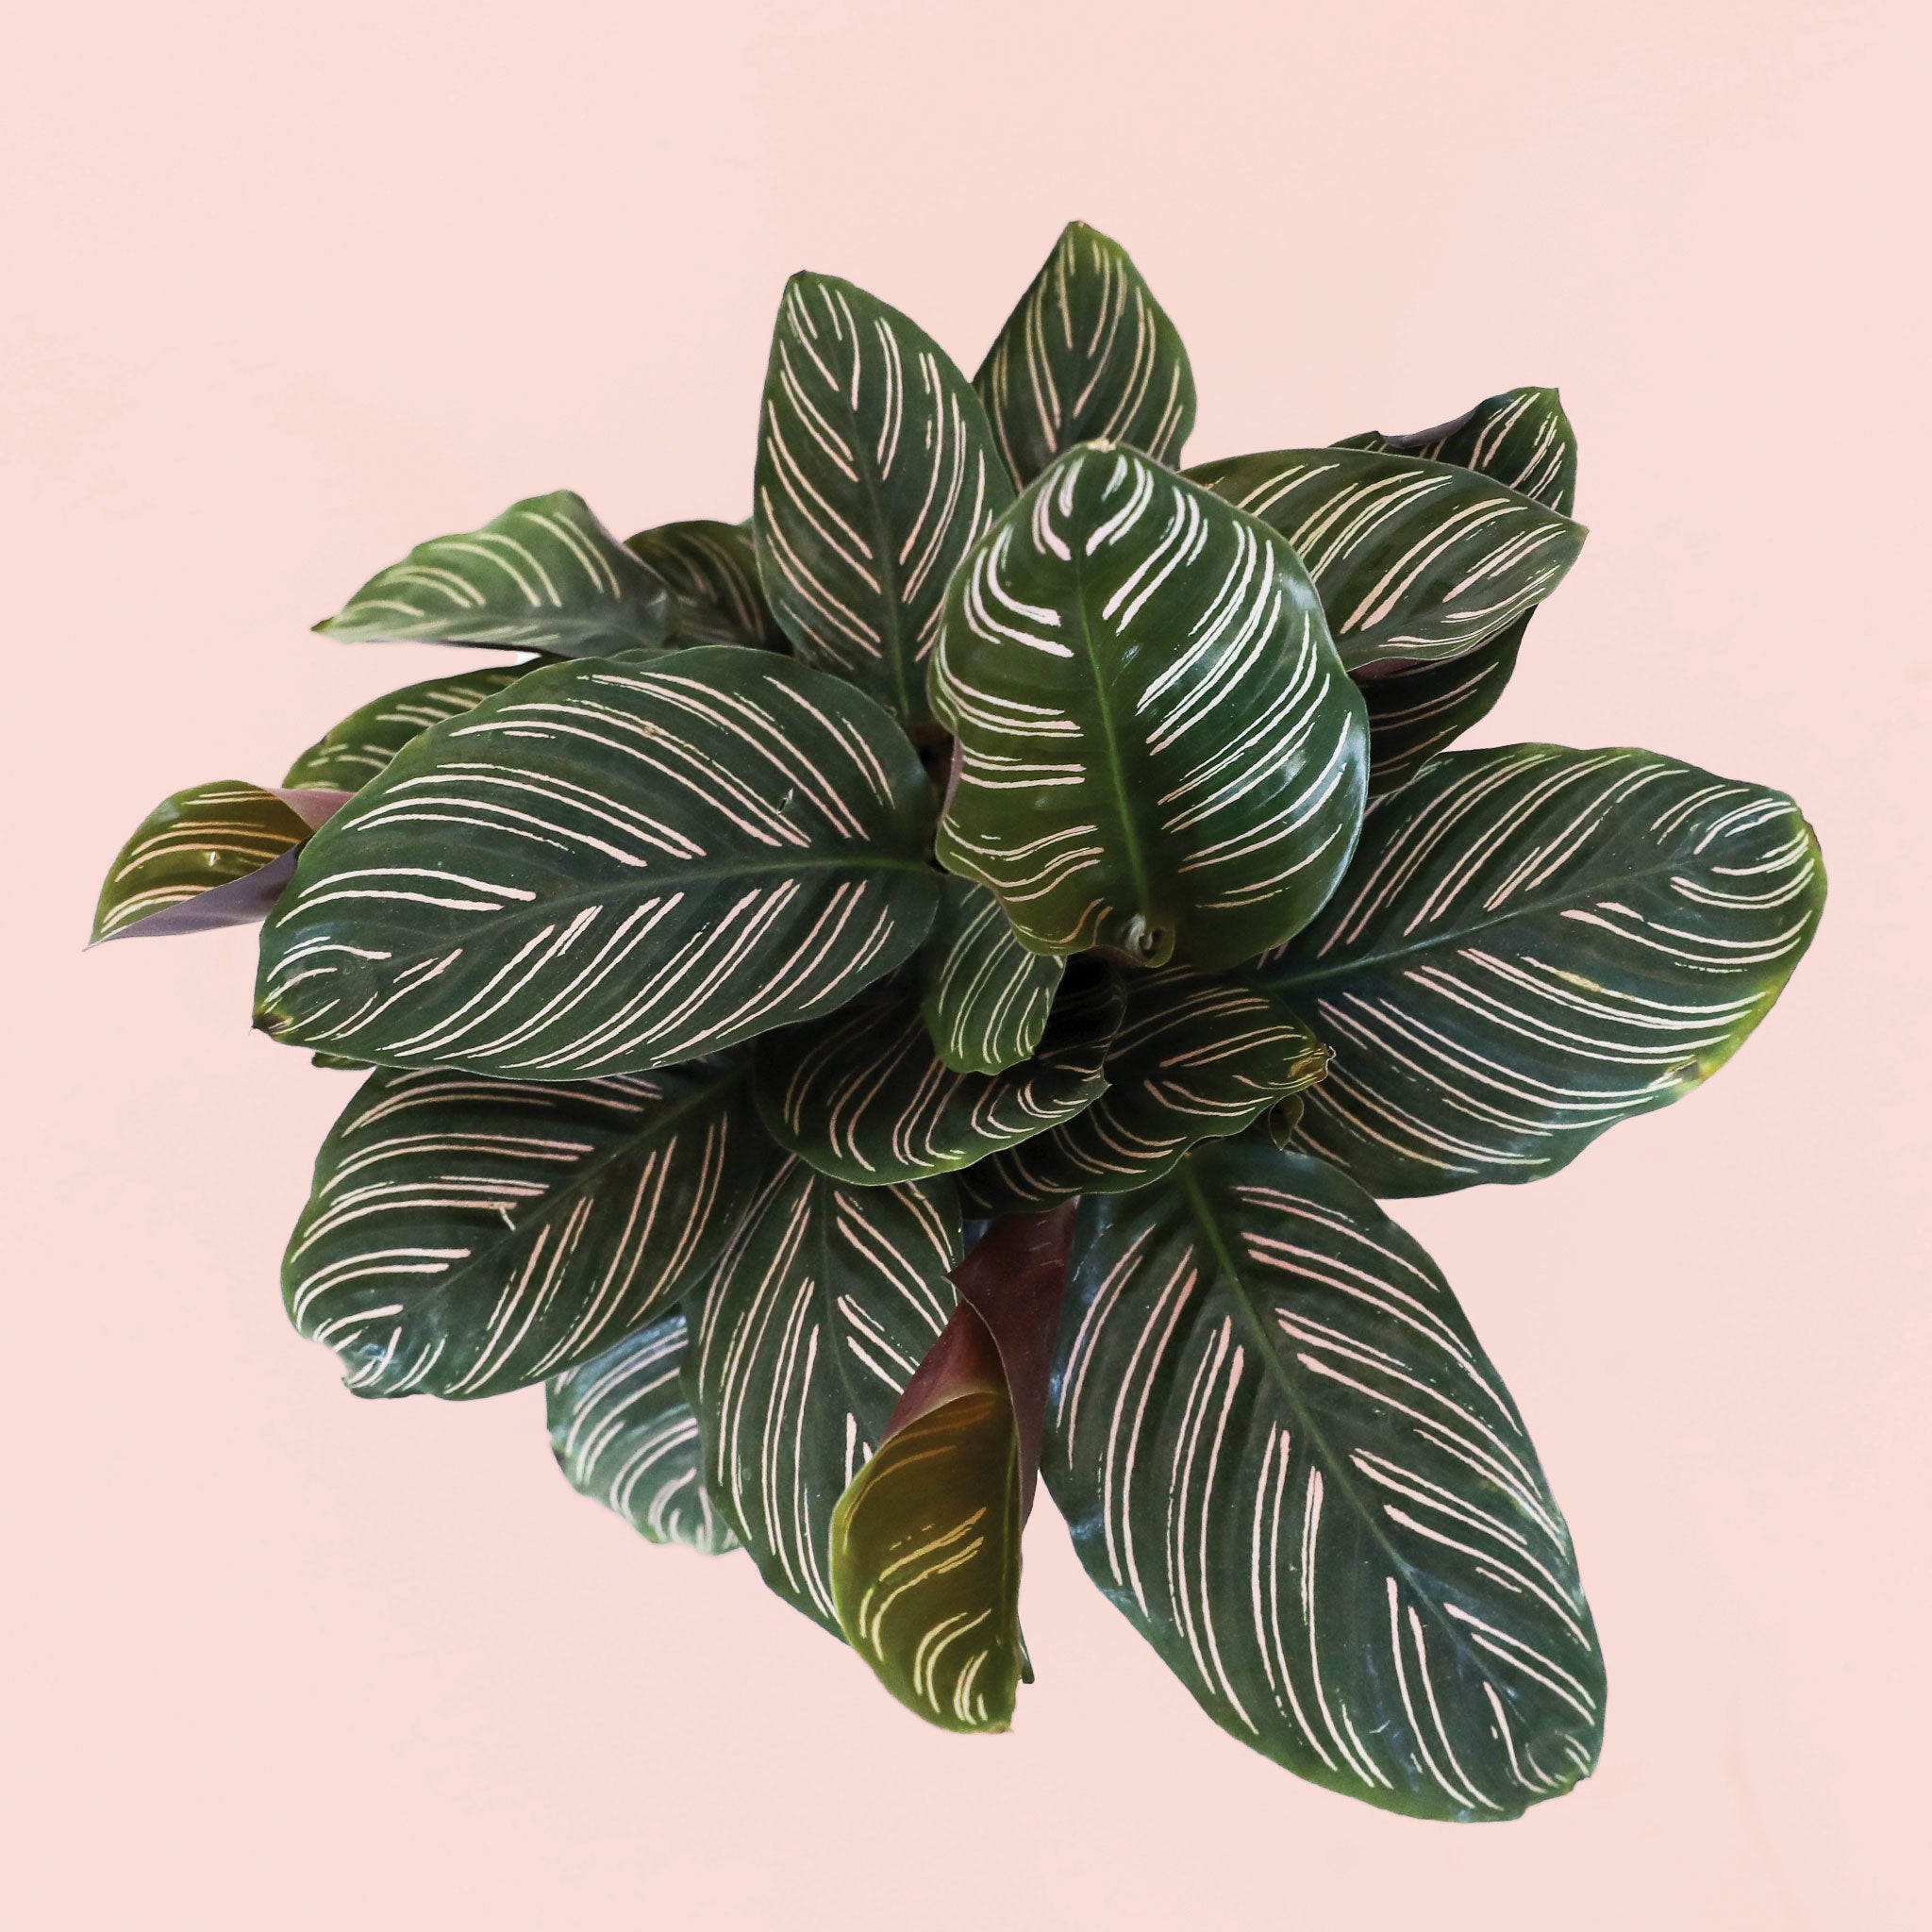 birds eye view of the top of a calathea ornata plant with pink pinstripe details on its leaves